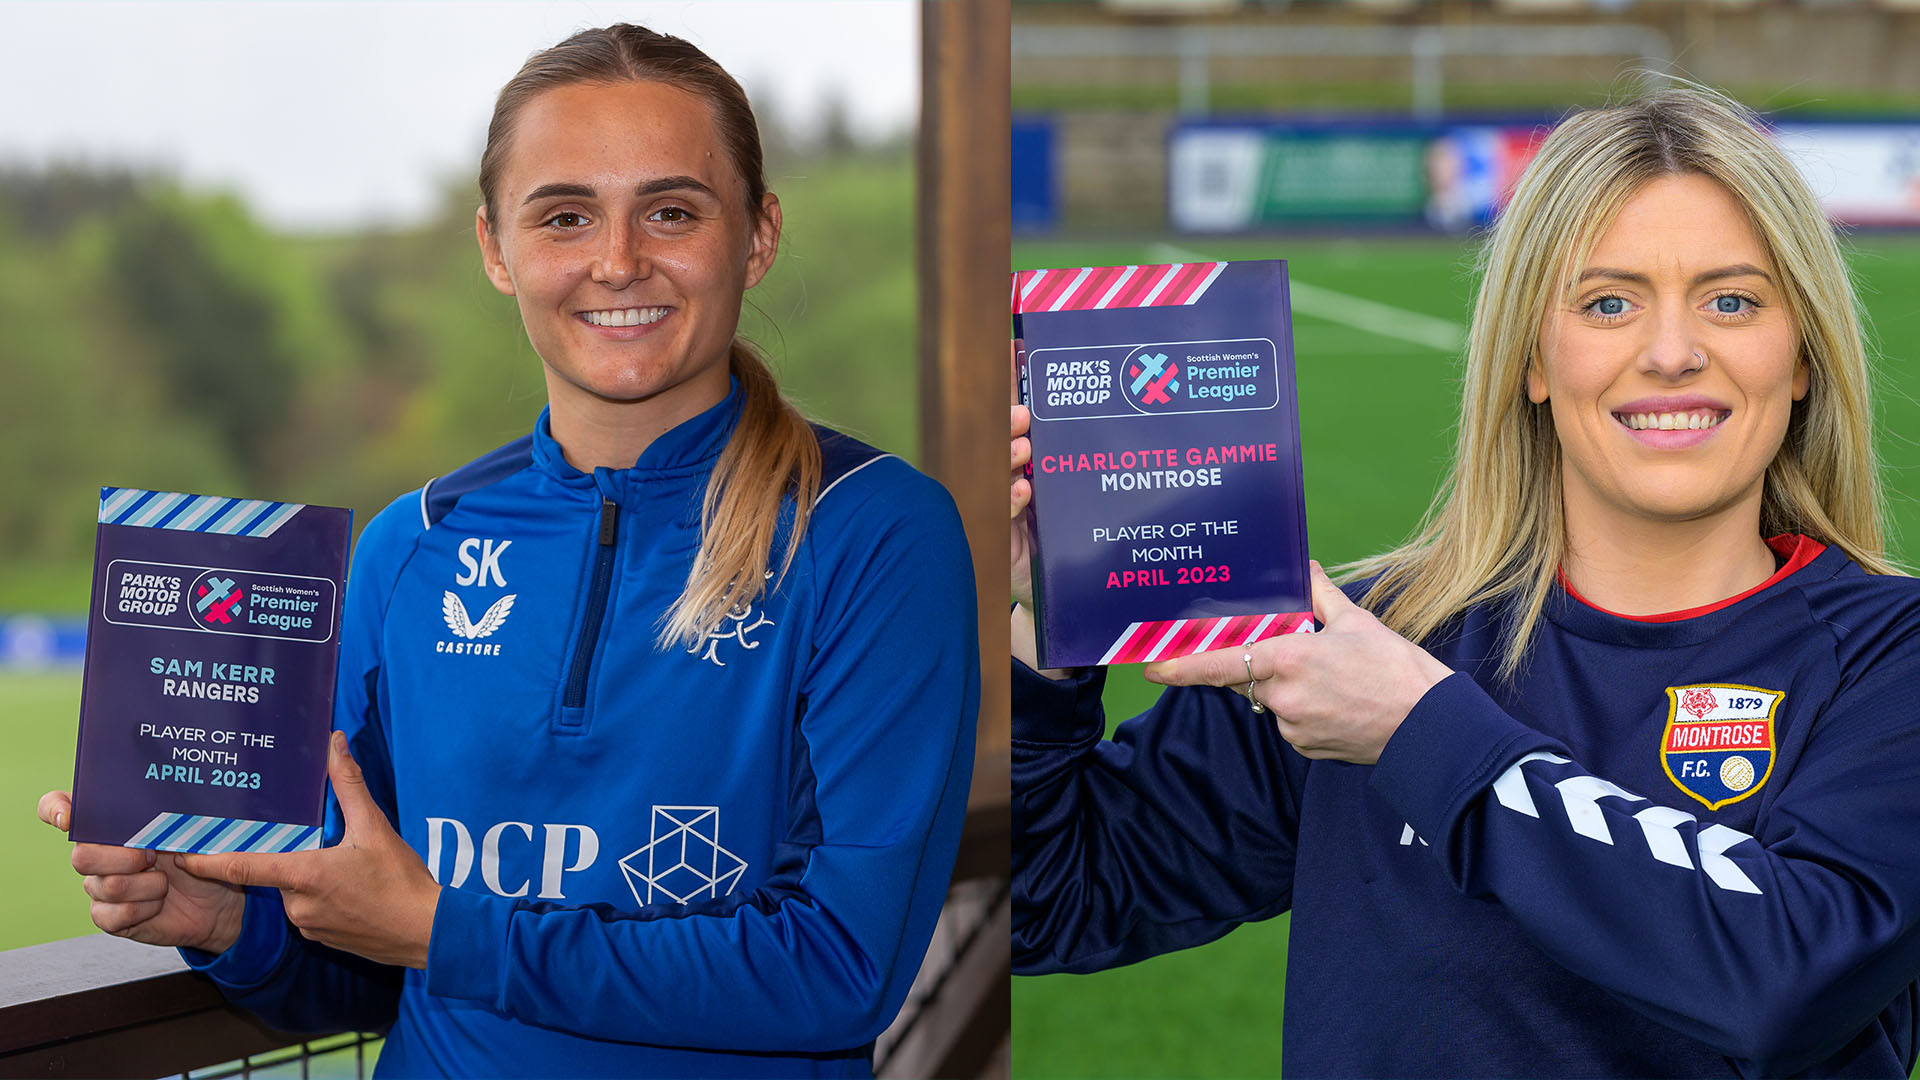 Midfielders Kerr and Gammie collect Player of the Month awards